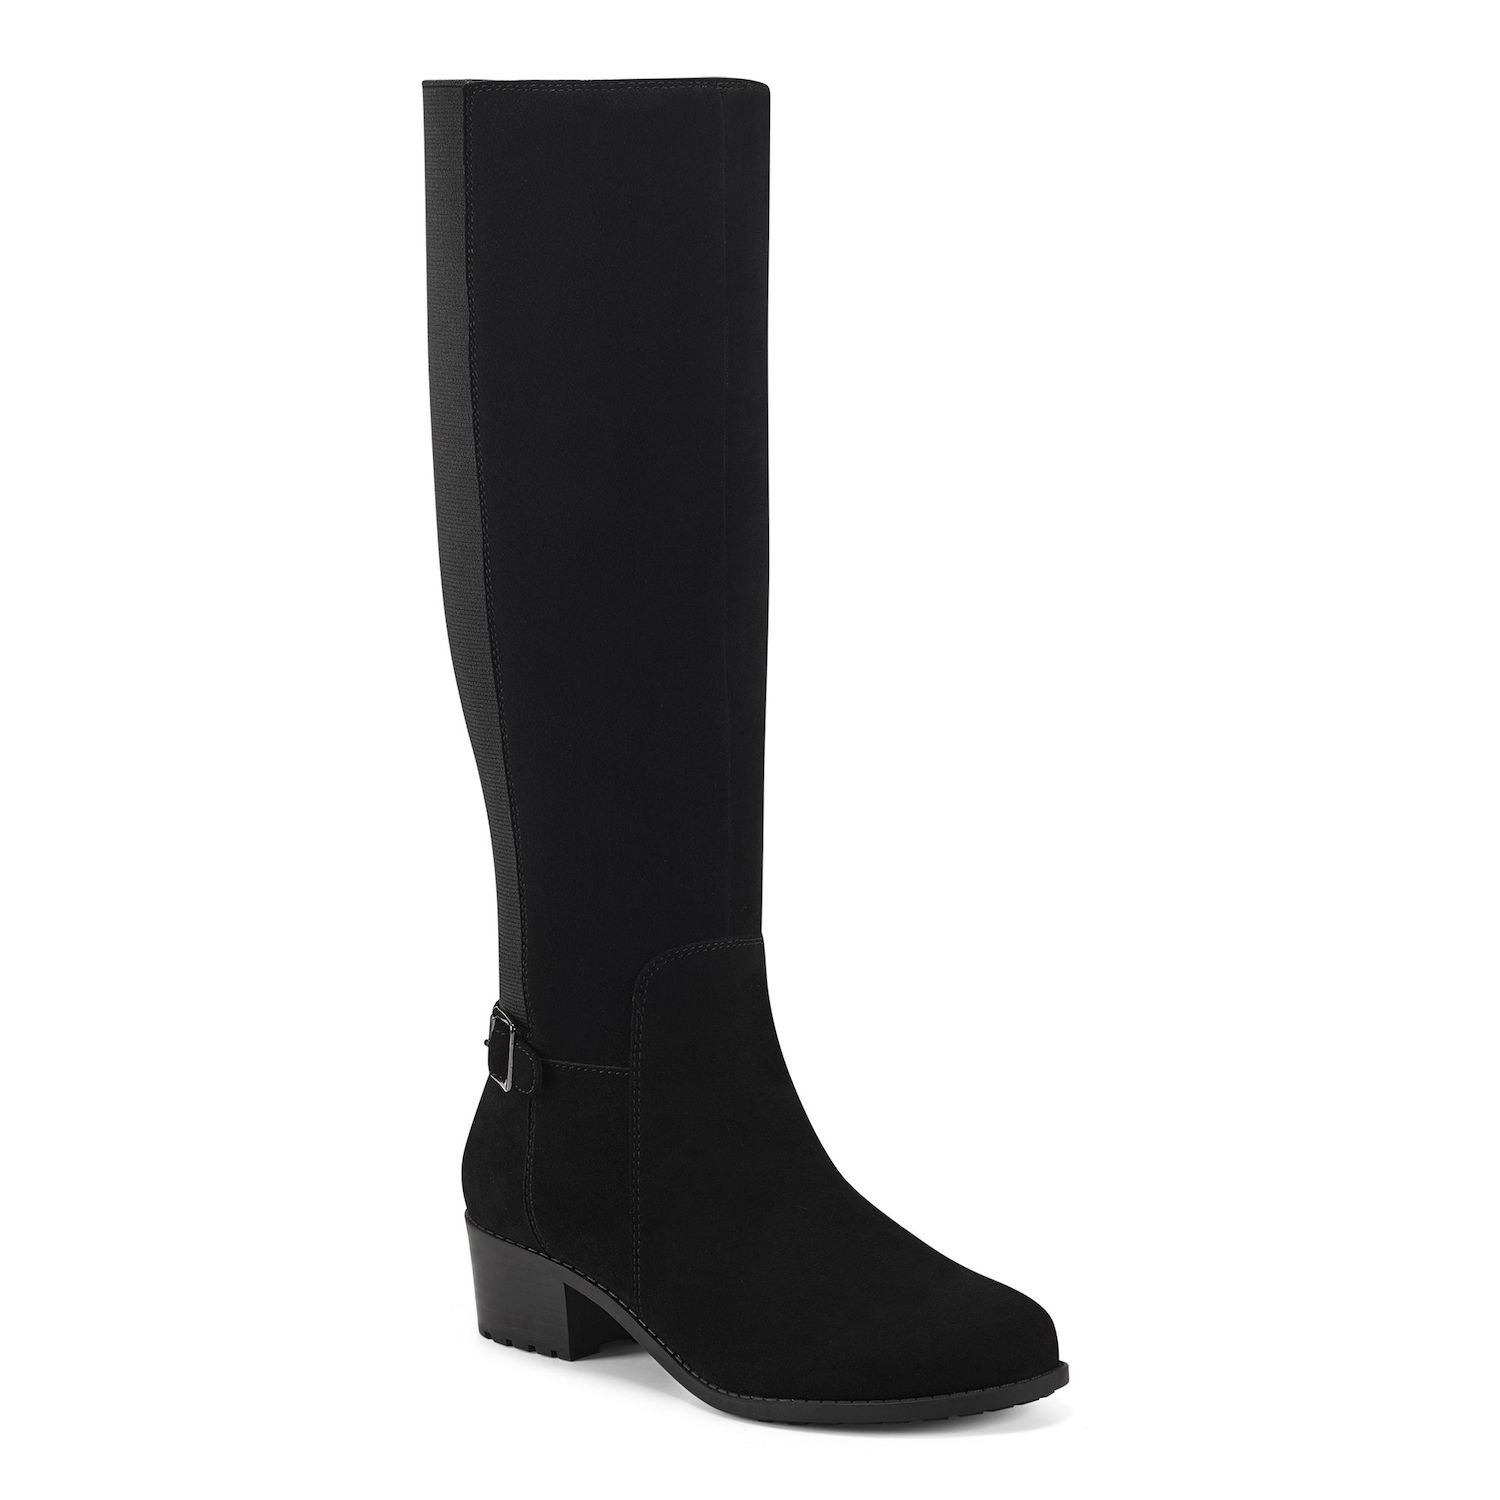 Image for Easy Spirit Chaza Women's Suede Knee-High Boots at Kohl's.